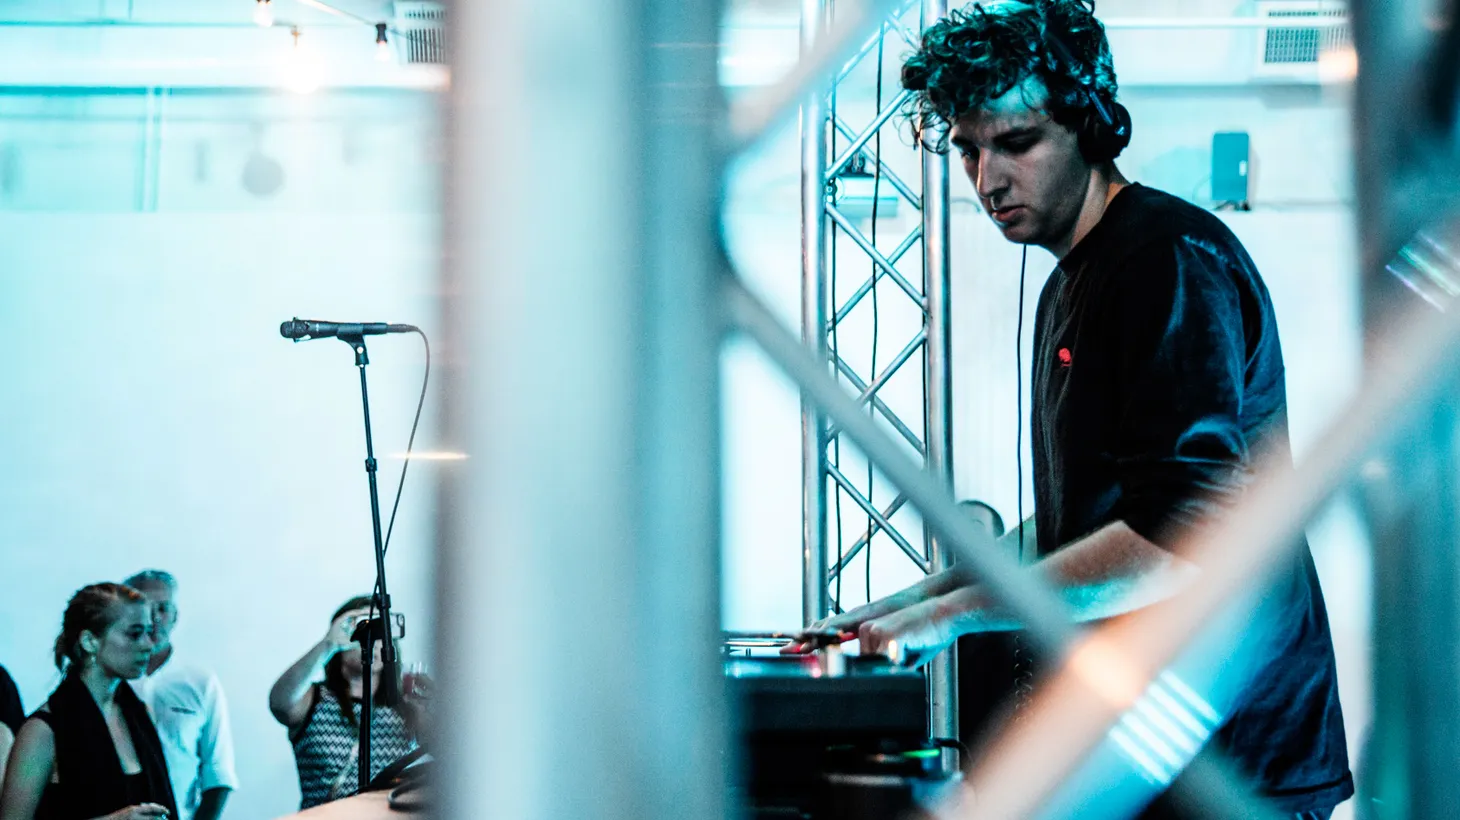 Producer Jamie xx burst onto the music scene as part of the highly successful group The xx and finally released his solo debut earlier this year. It's a dazzling collection of songs and is among the most played albums of the year at KCRW.